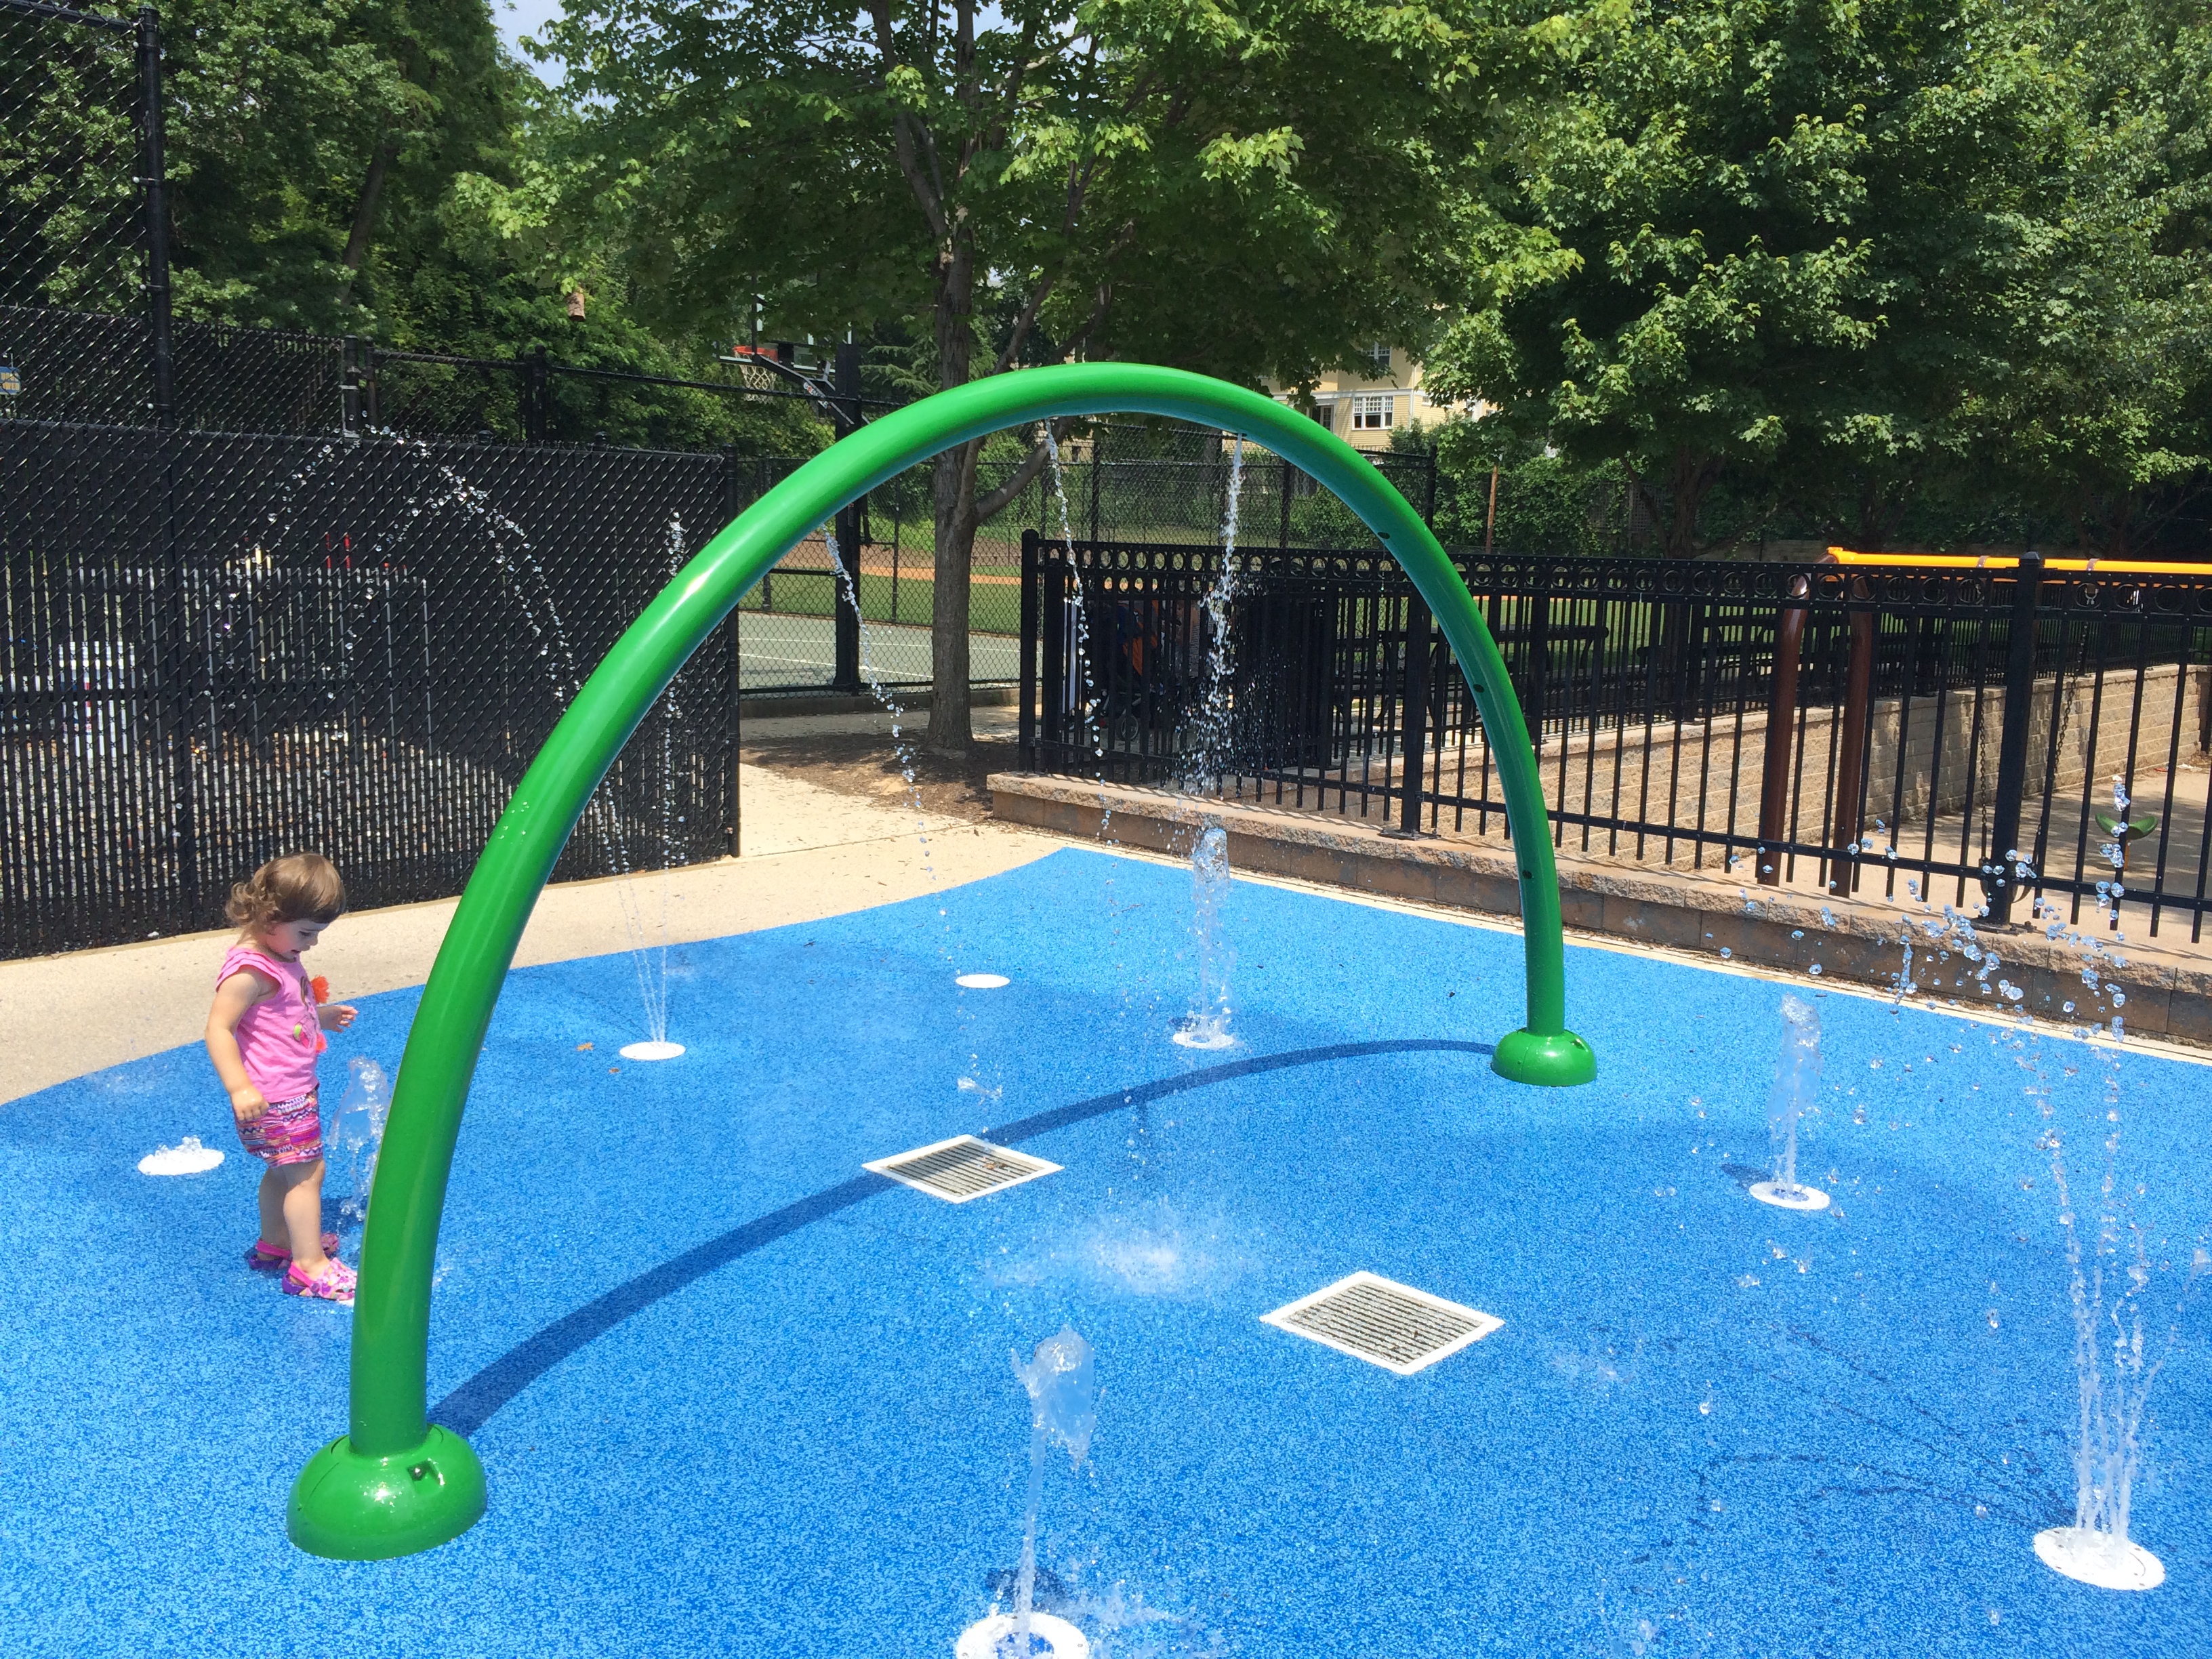 D.C. opens spray parks early